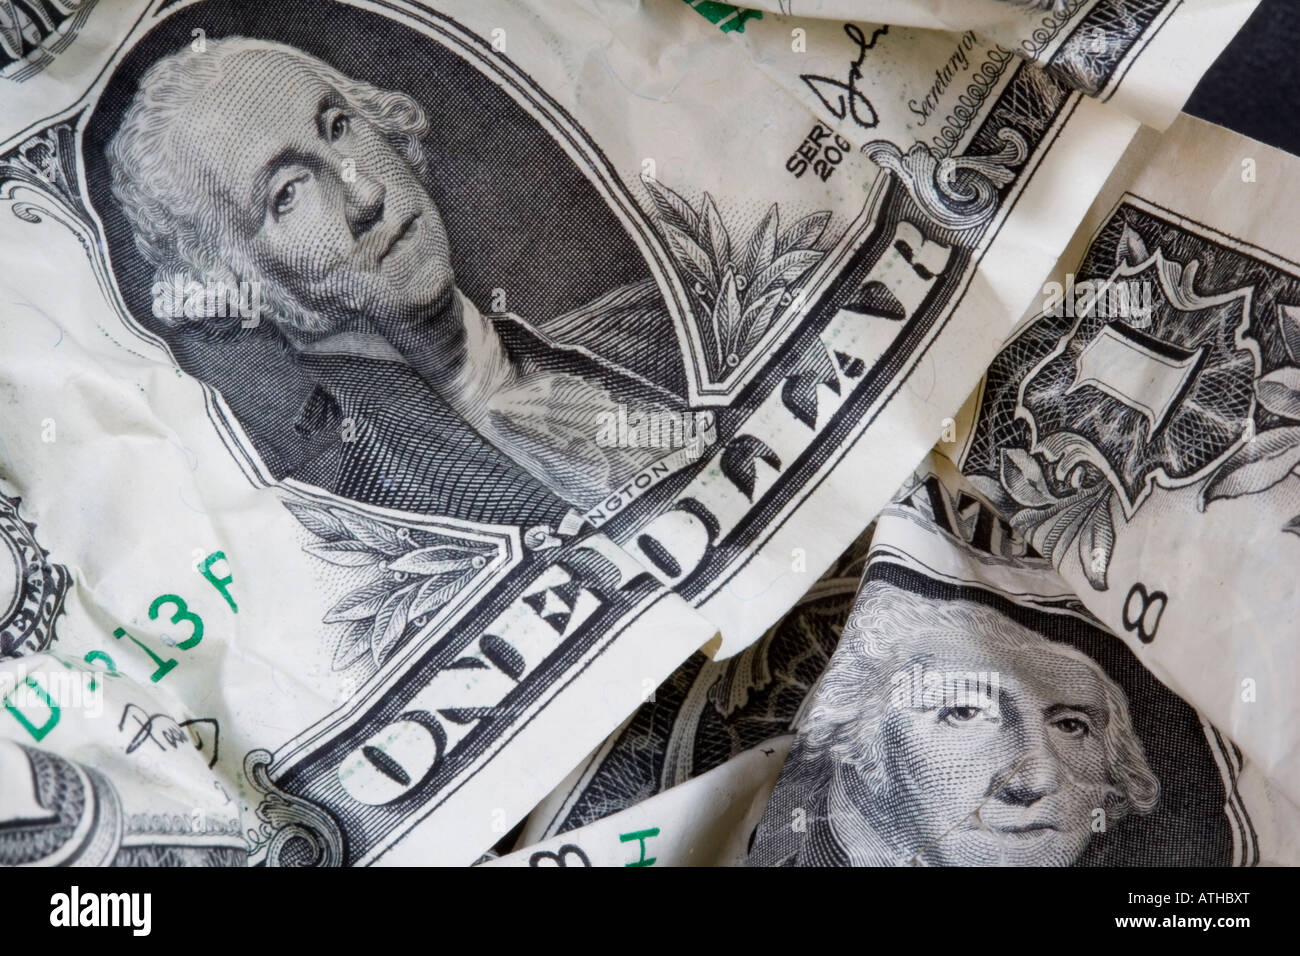 Crumpled up and damaged 1 Dollar banknotes Stock Photo